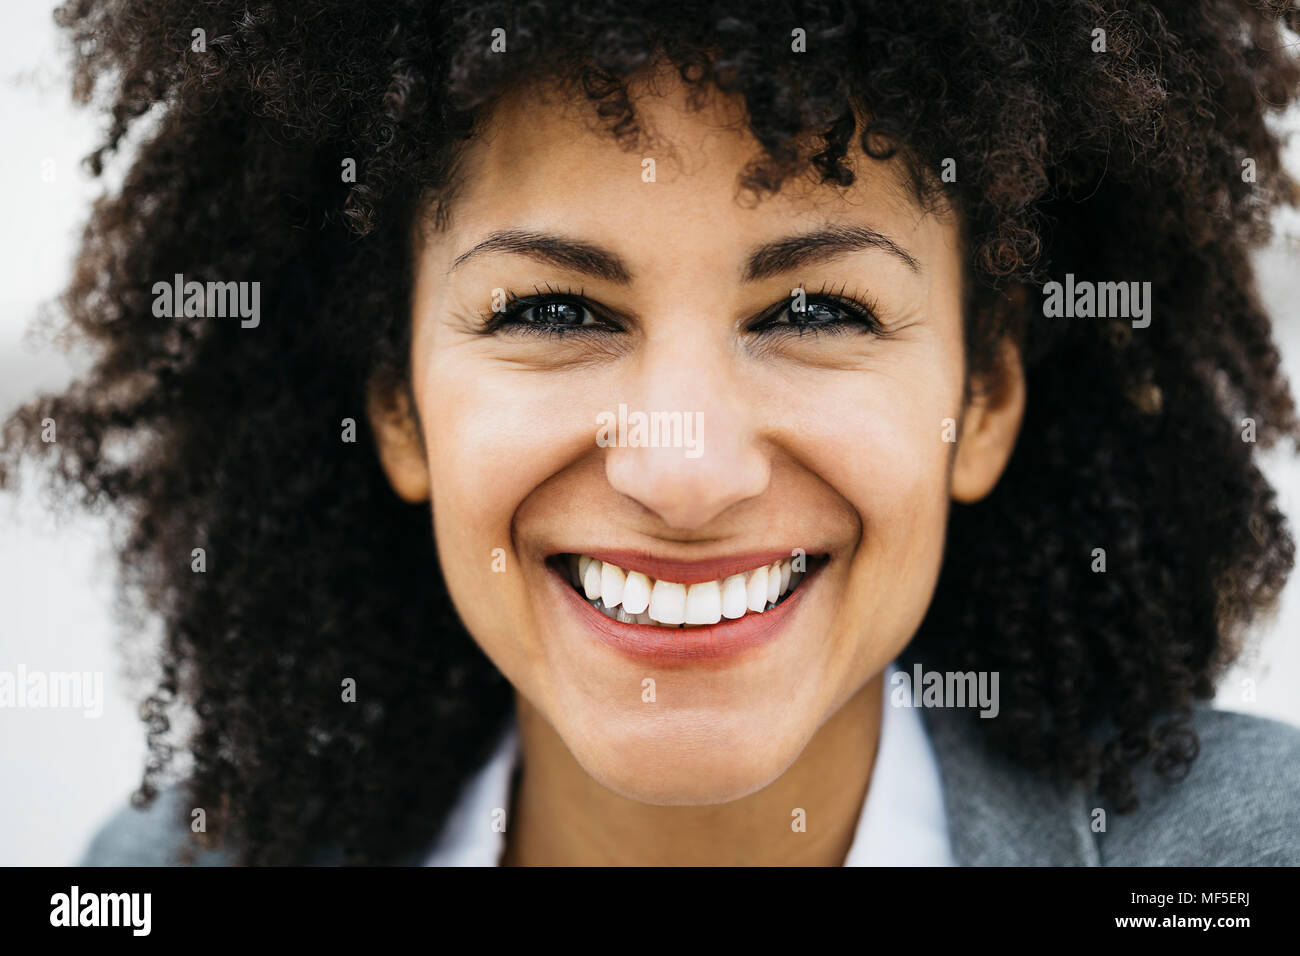 Portrait of happy woman with curly hair Stock Photo